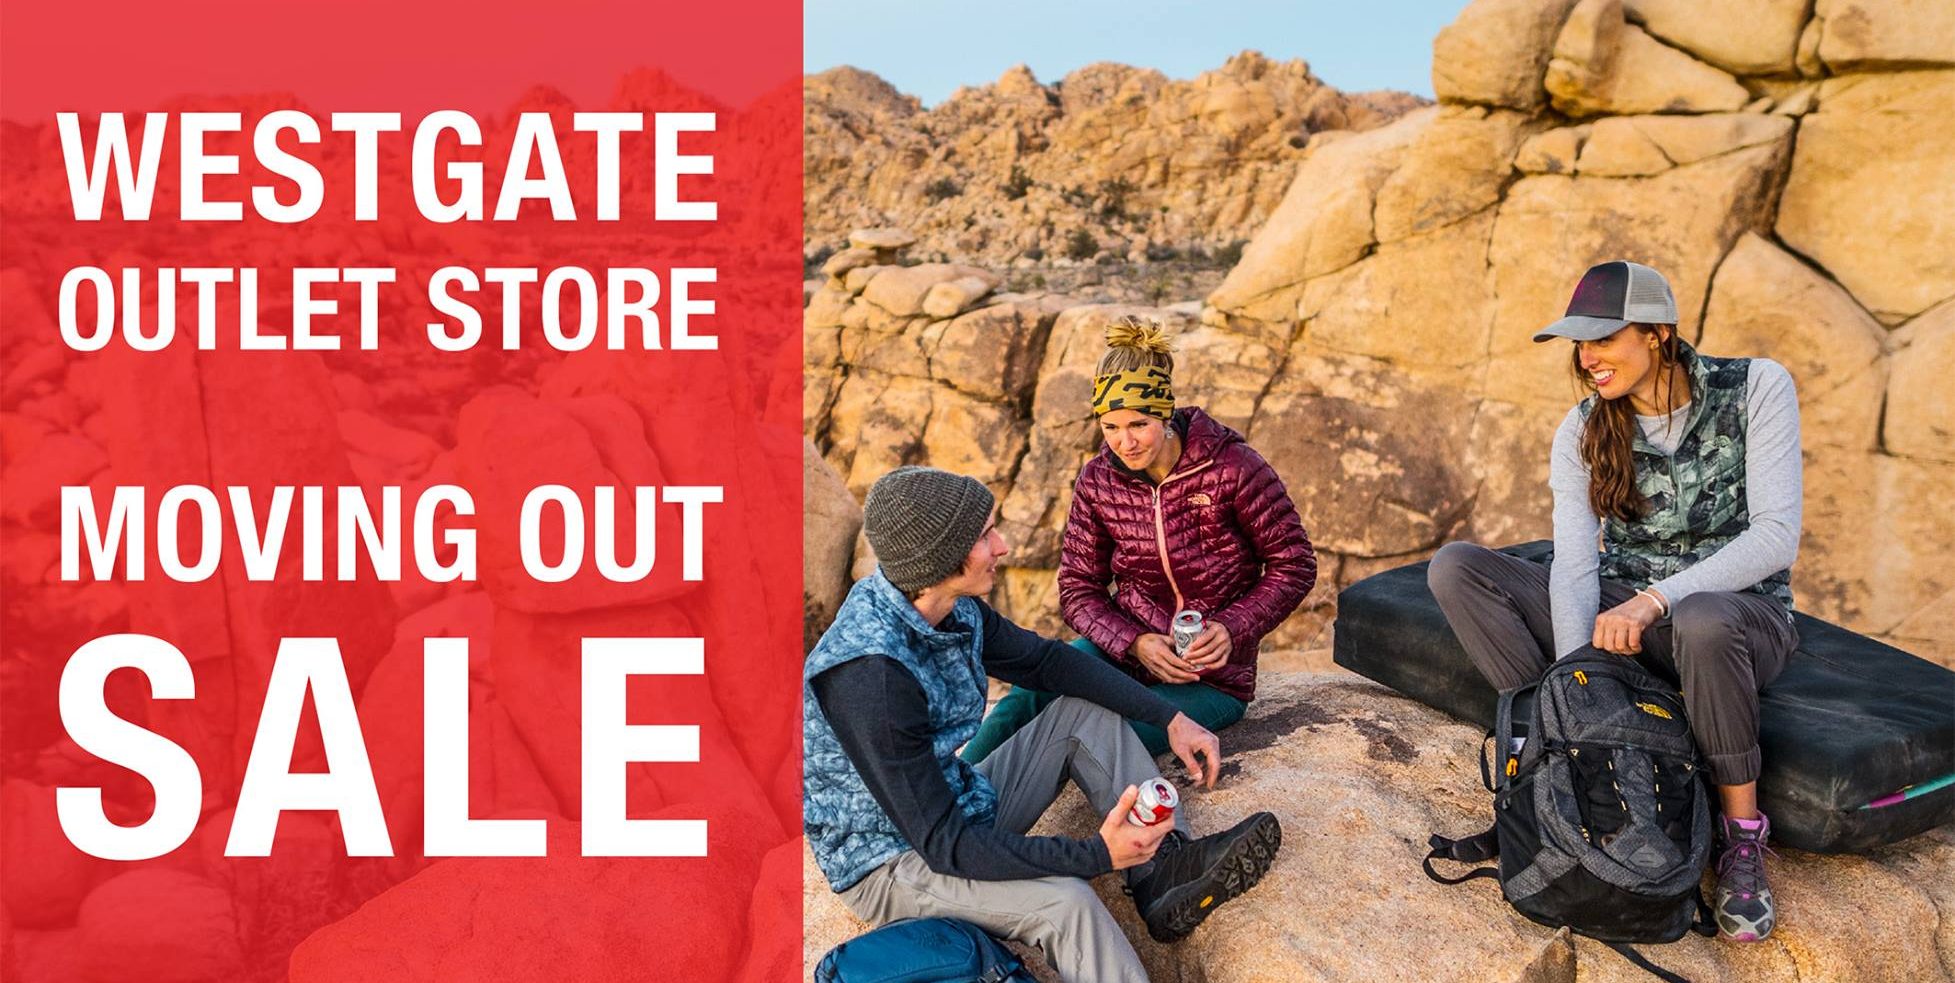 The North Face Singapore Westgate Outlet Moving Out Sale Promotion ends 19 Feb 2017